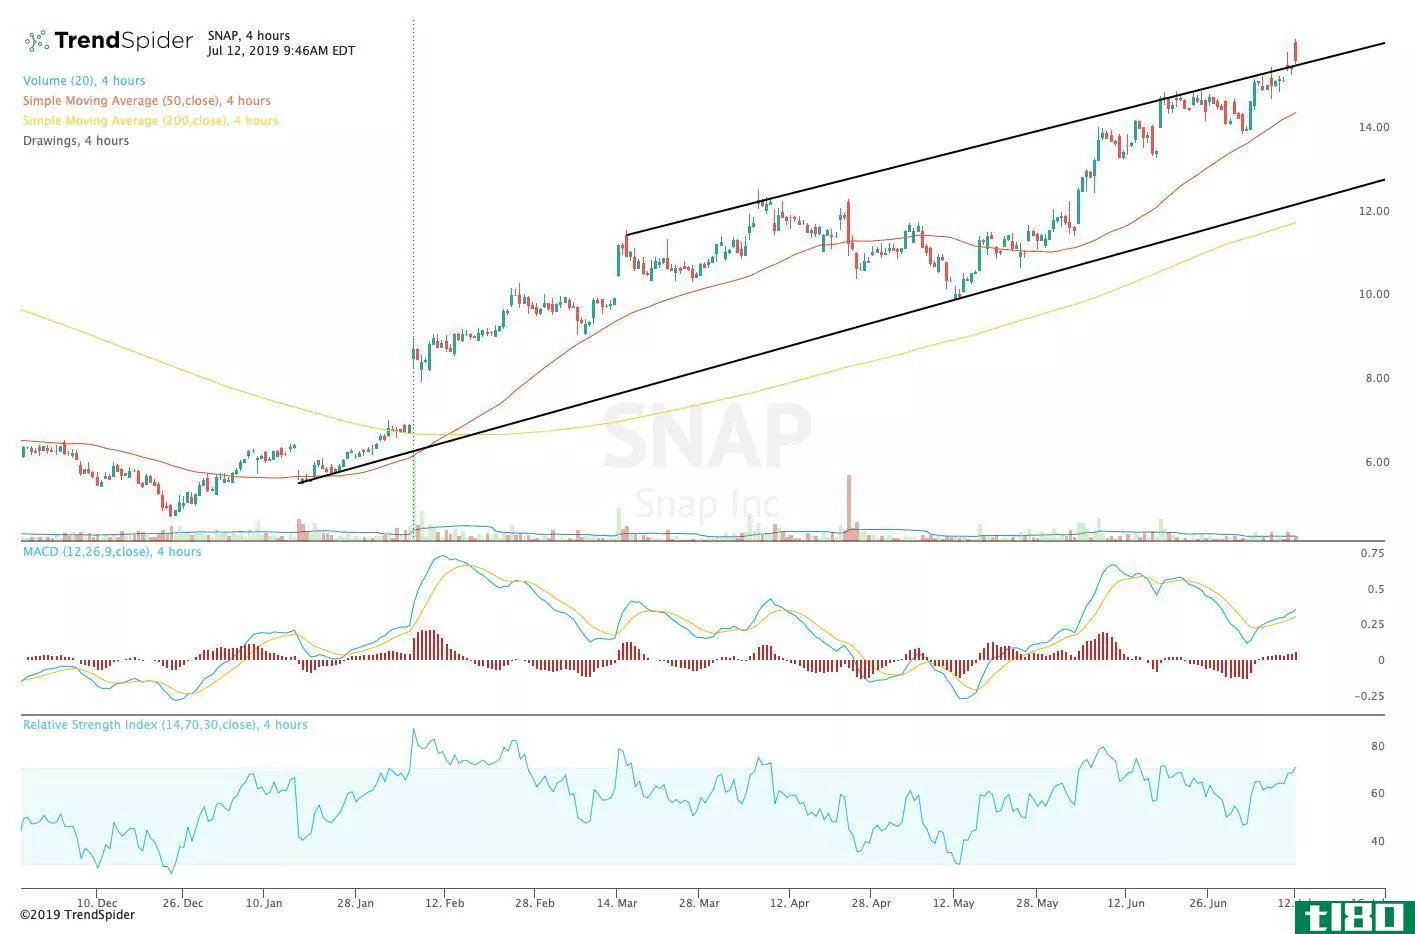 Chart showing the share price performance of Snap Inc. (SNAP)